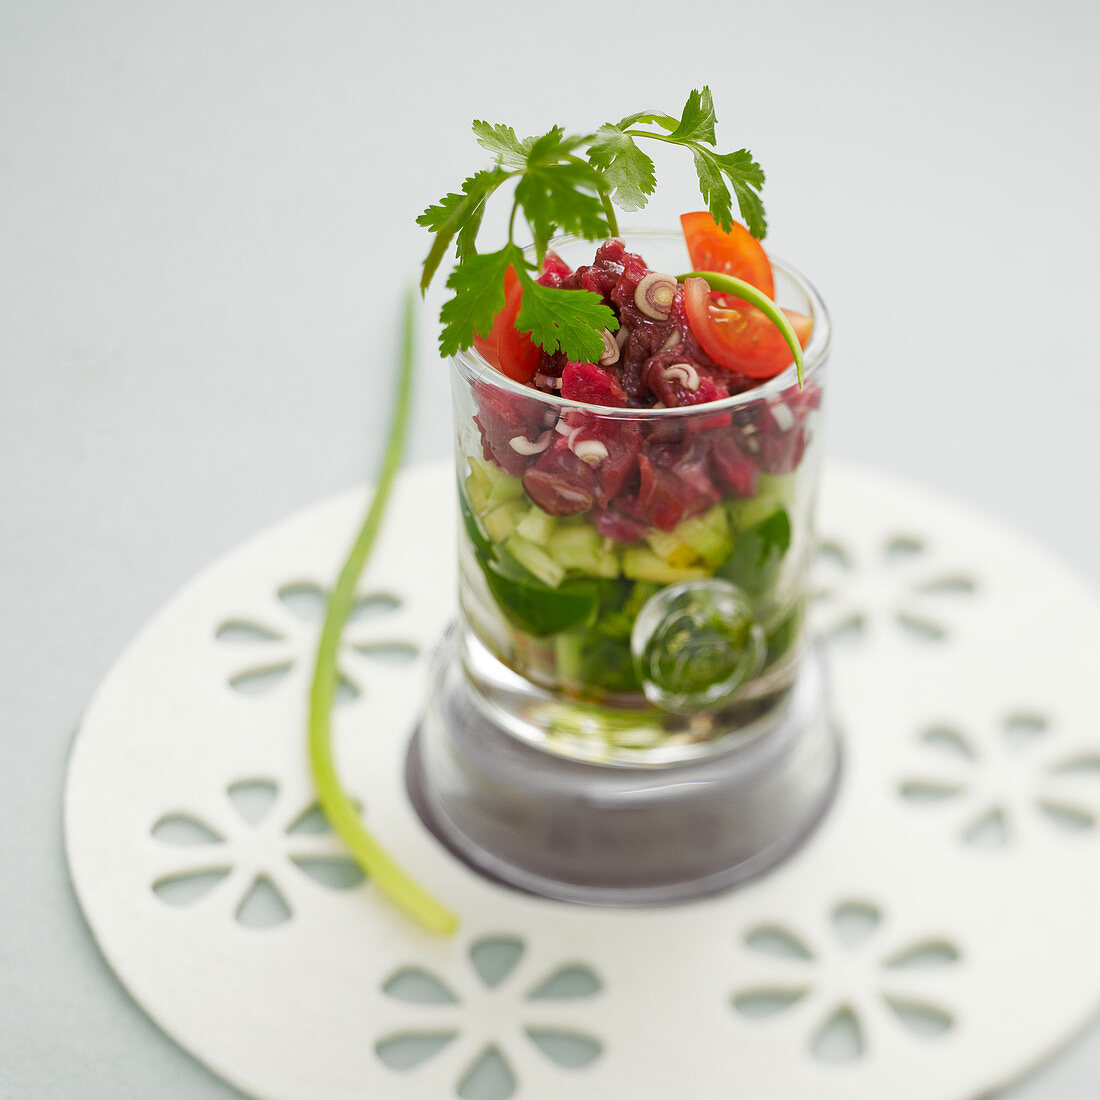 Beef tartare with Thai-style vegetables